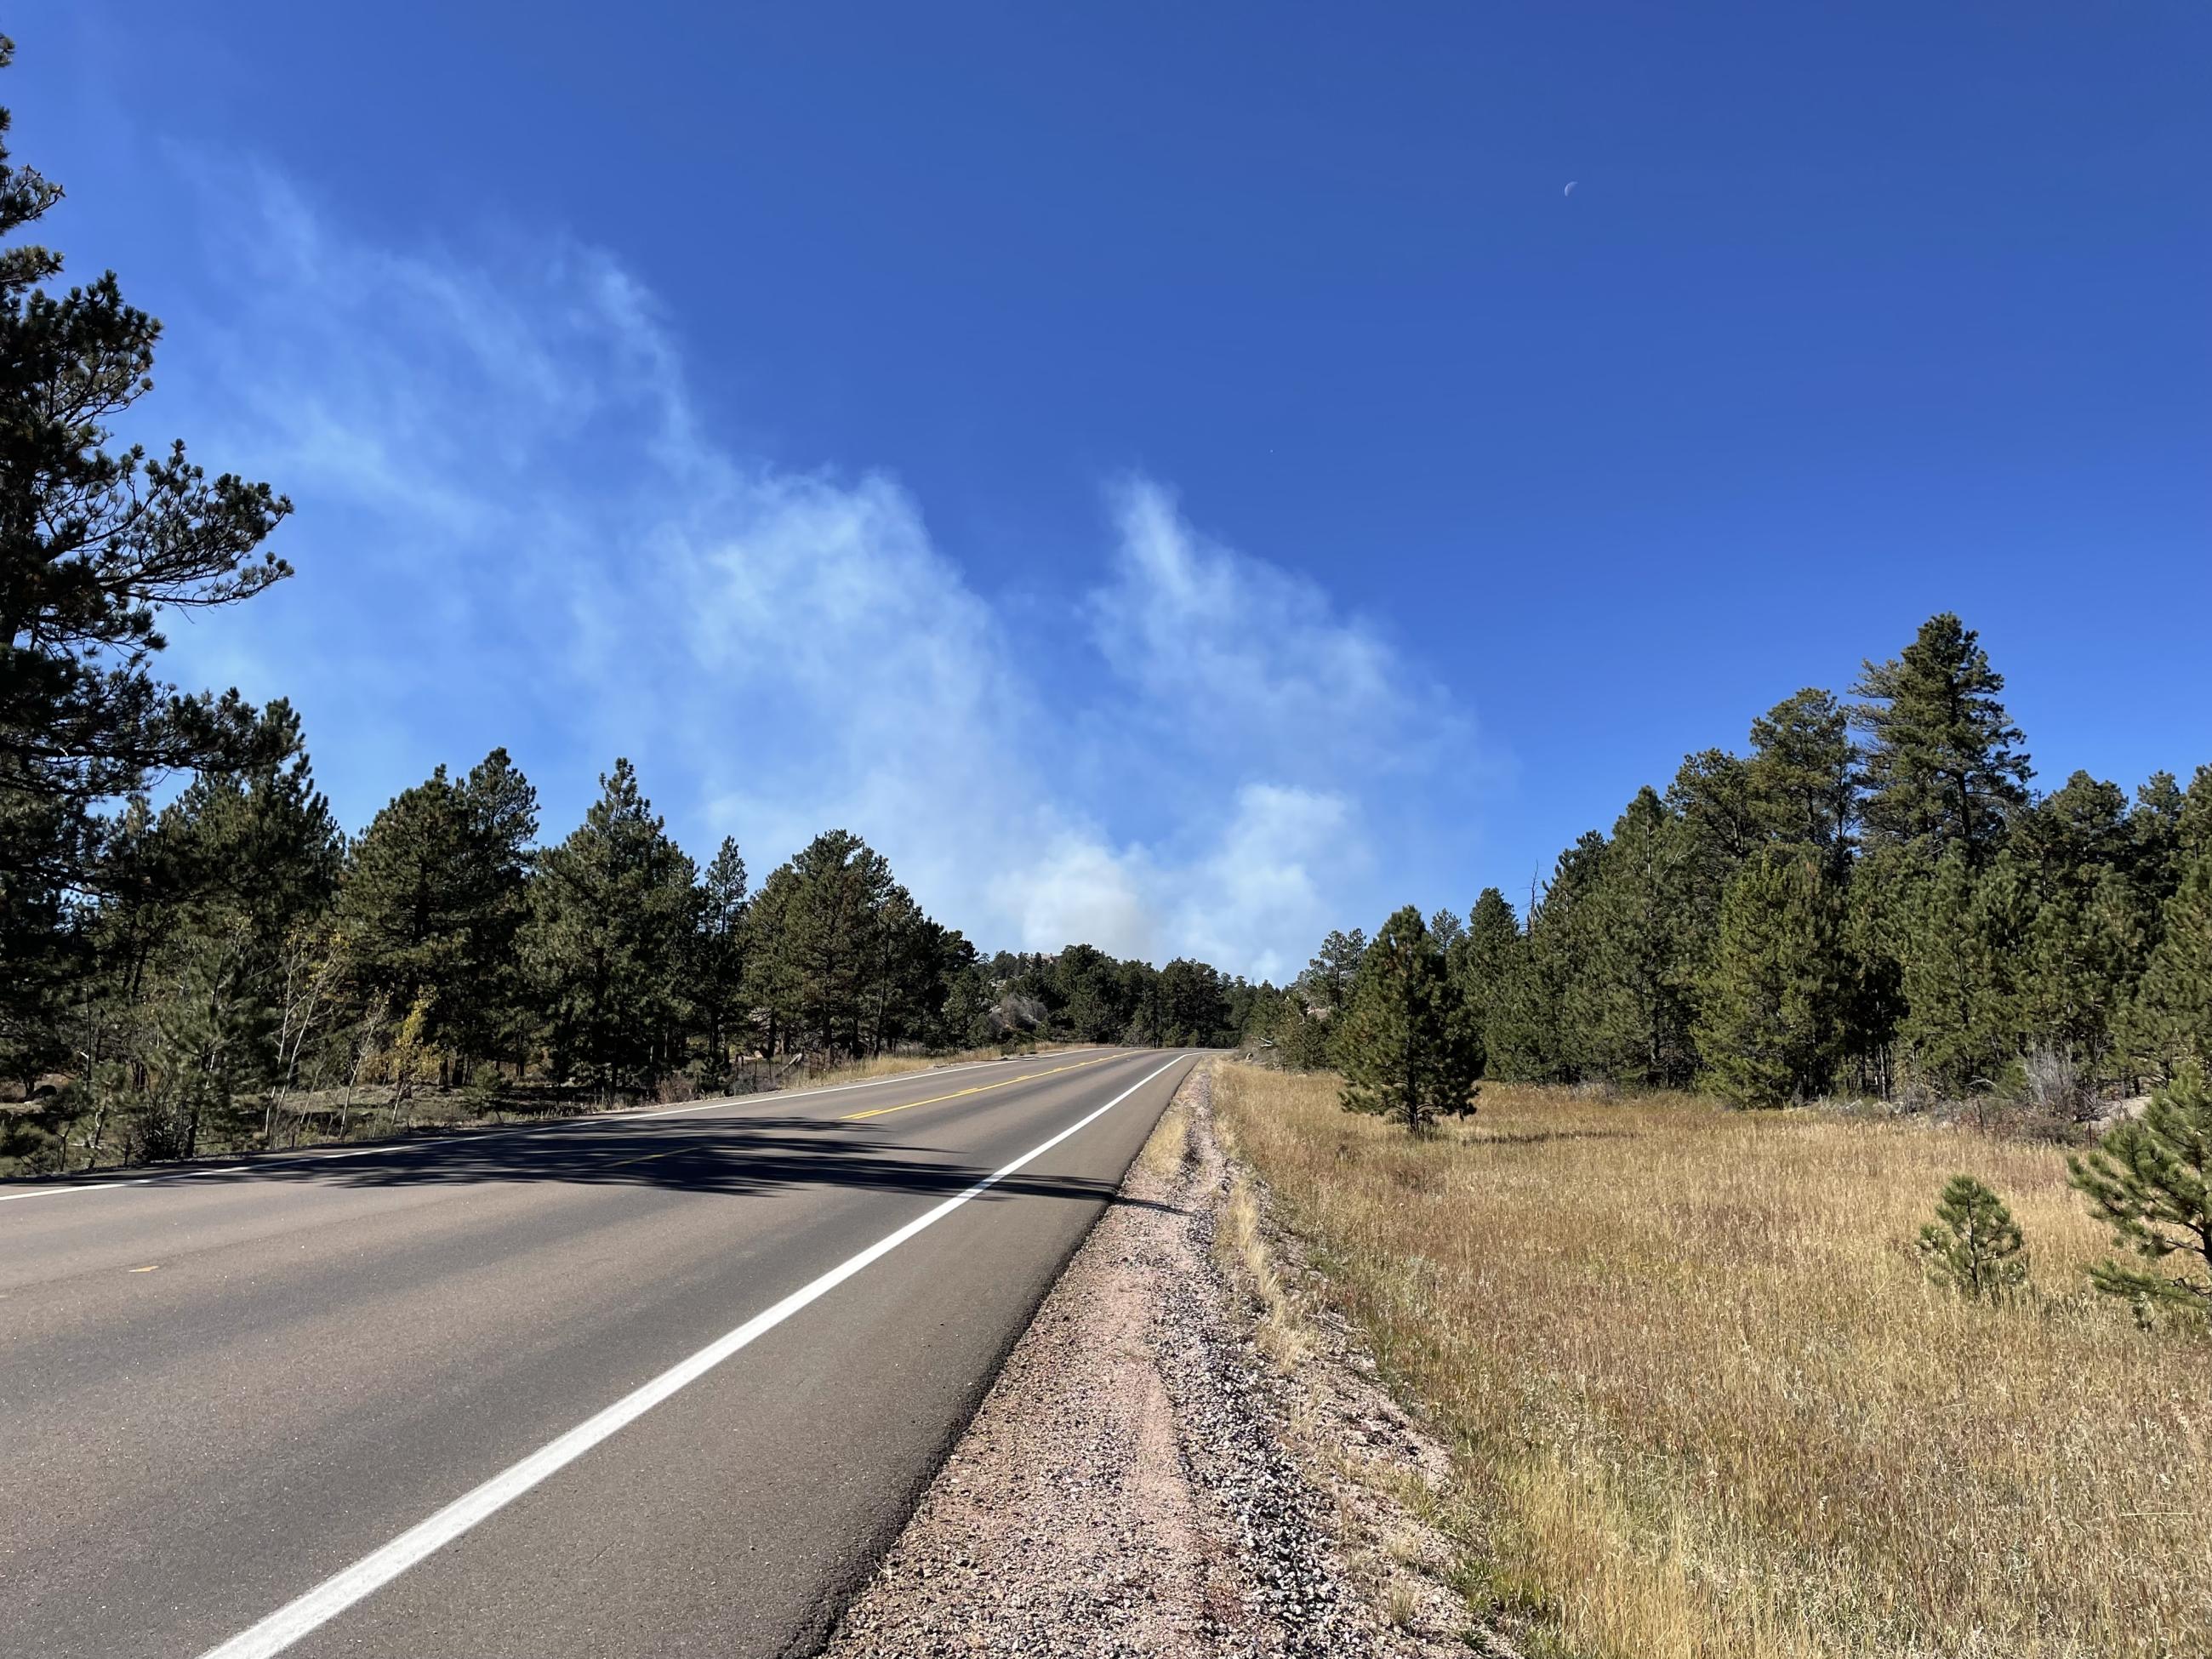 Smoke visible in the area of county road 74e and lady moon trailhead